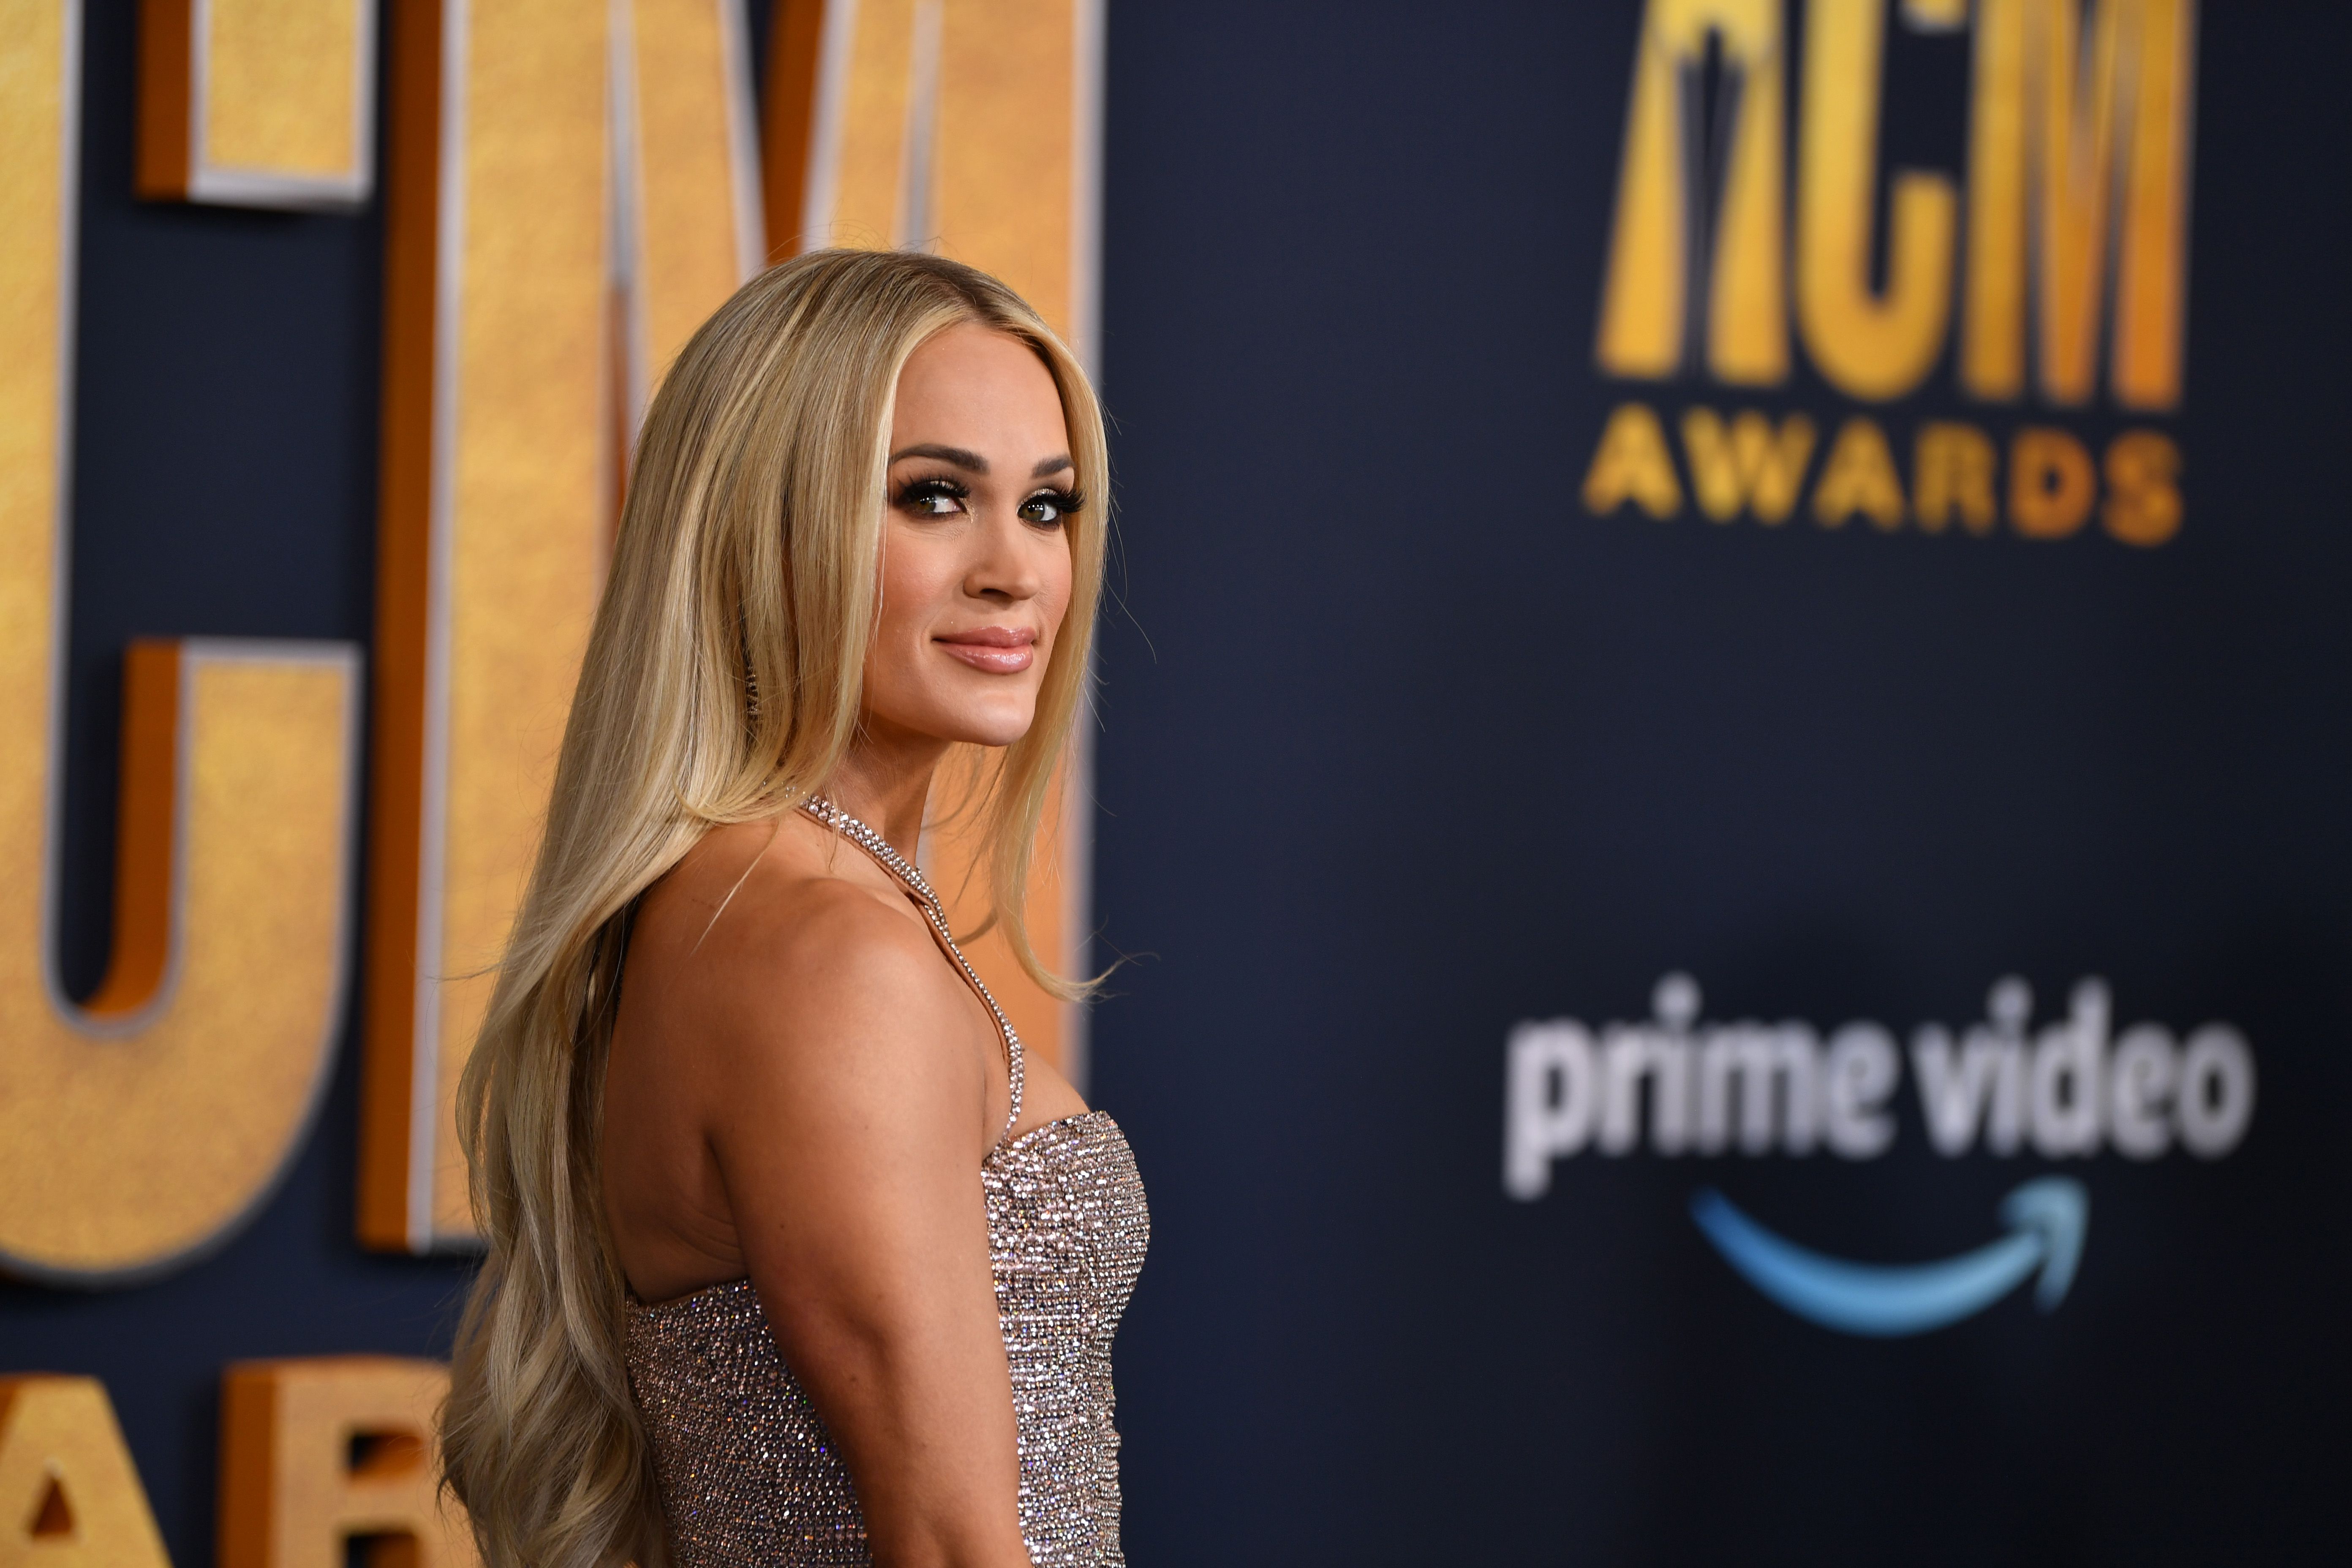 Carrie Underwood Dresses at the ACM Awards 2018